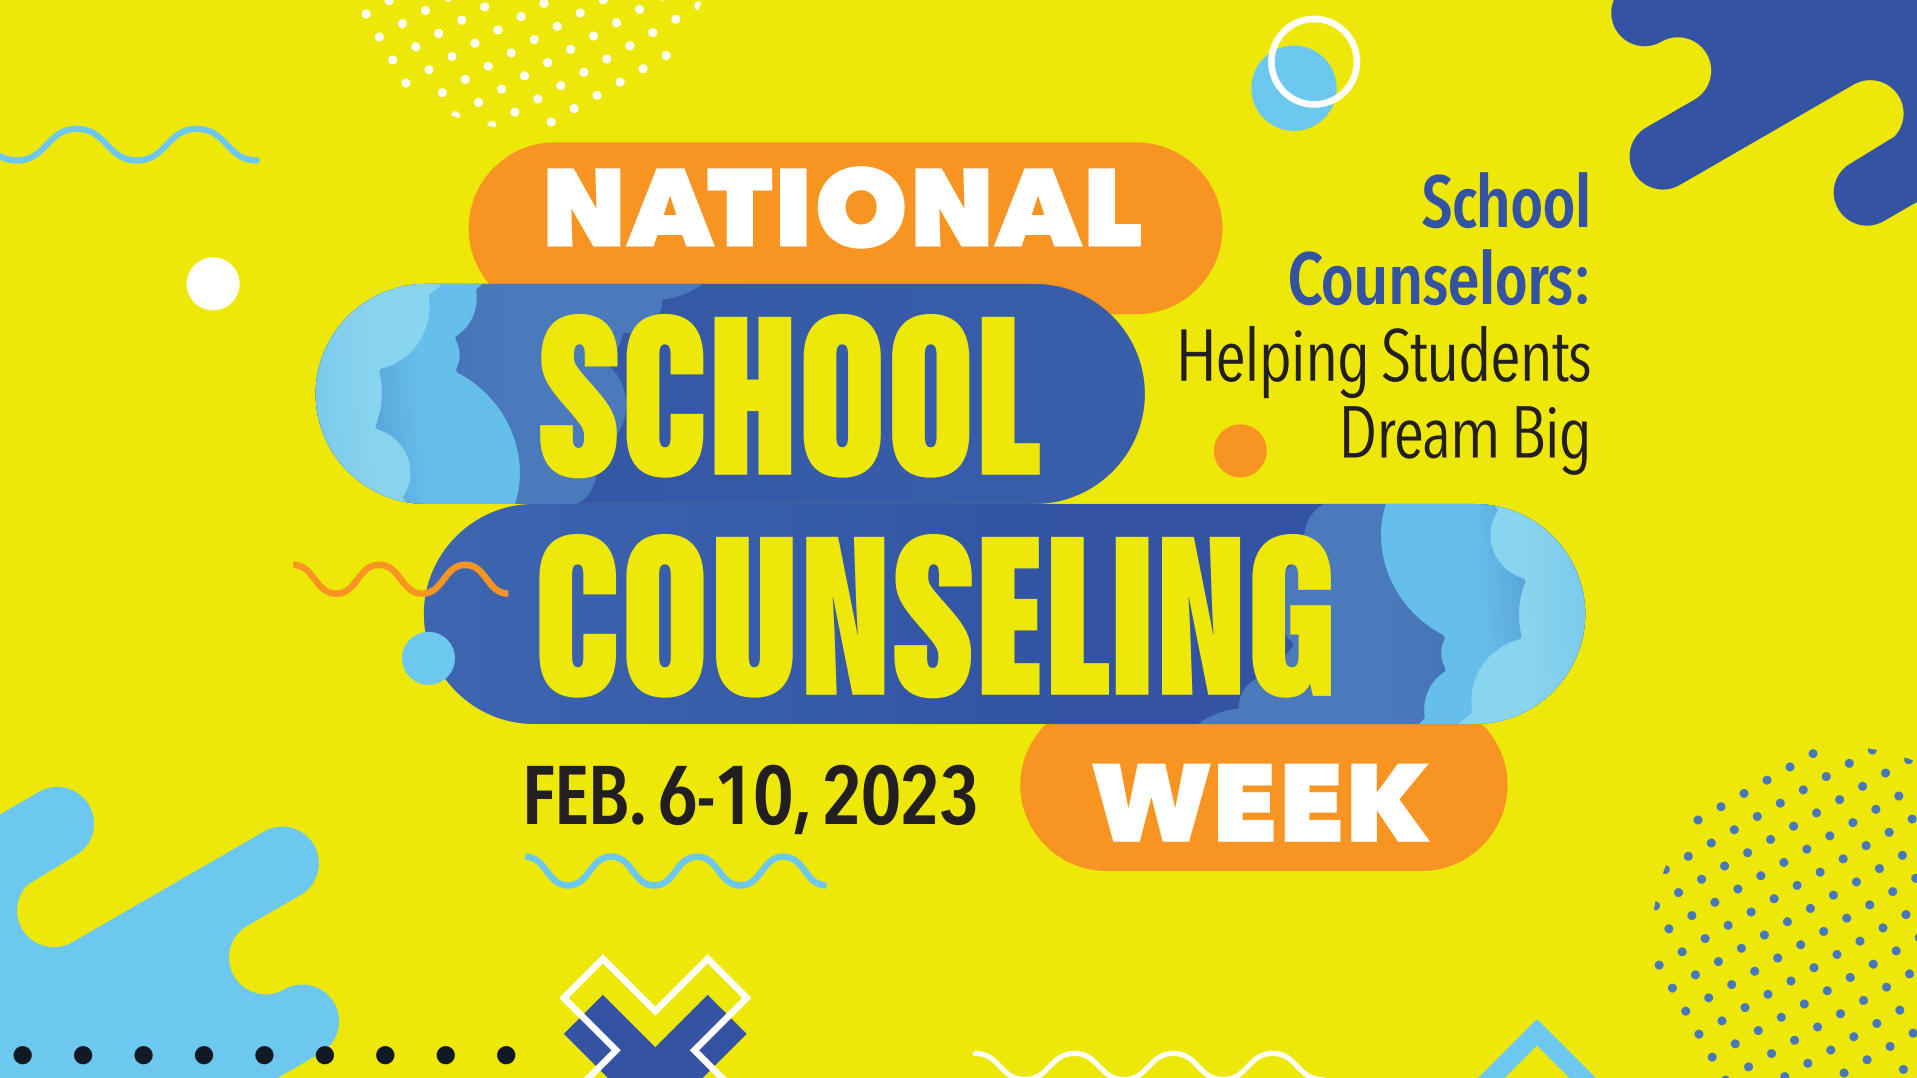 national school counseling week 2023 - yellow and blue and orange informational flyer recognizing national school counseling week feb 6-10 2023